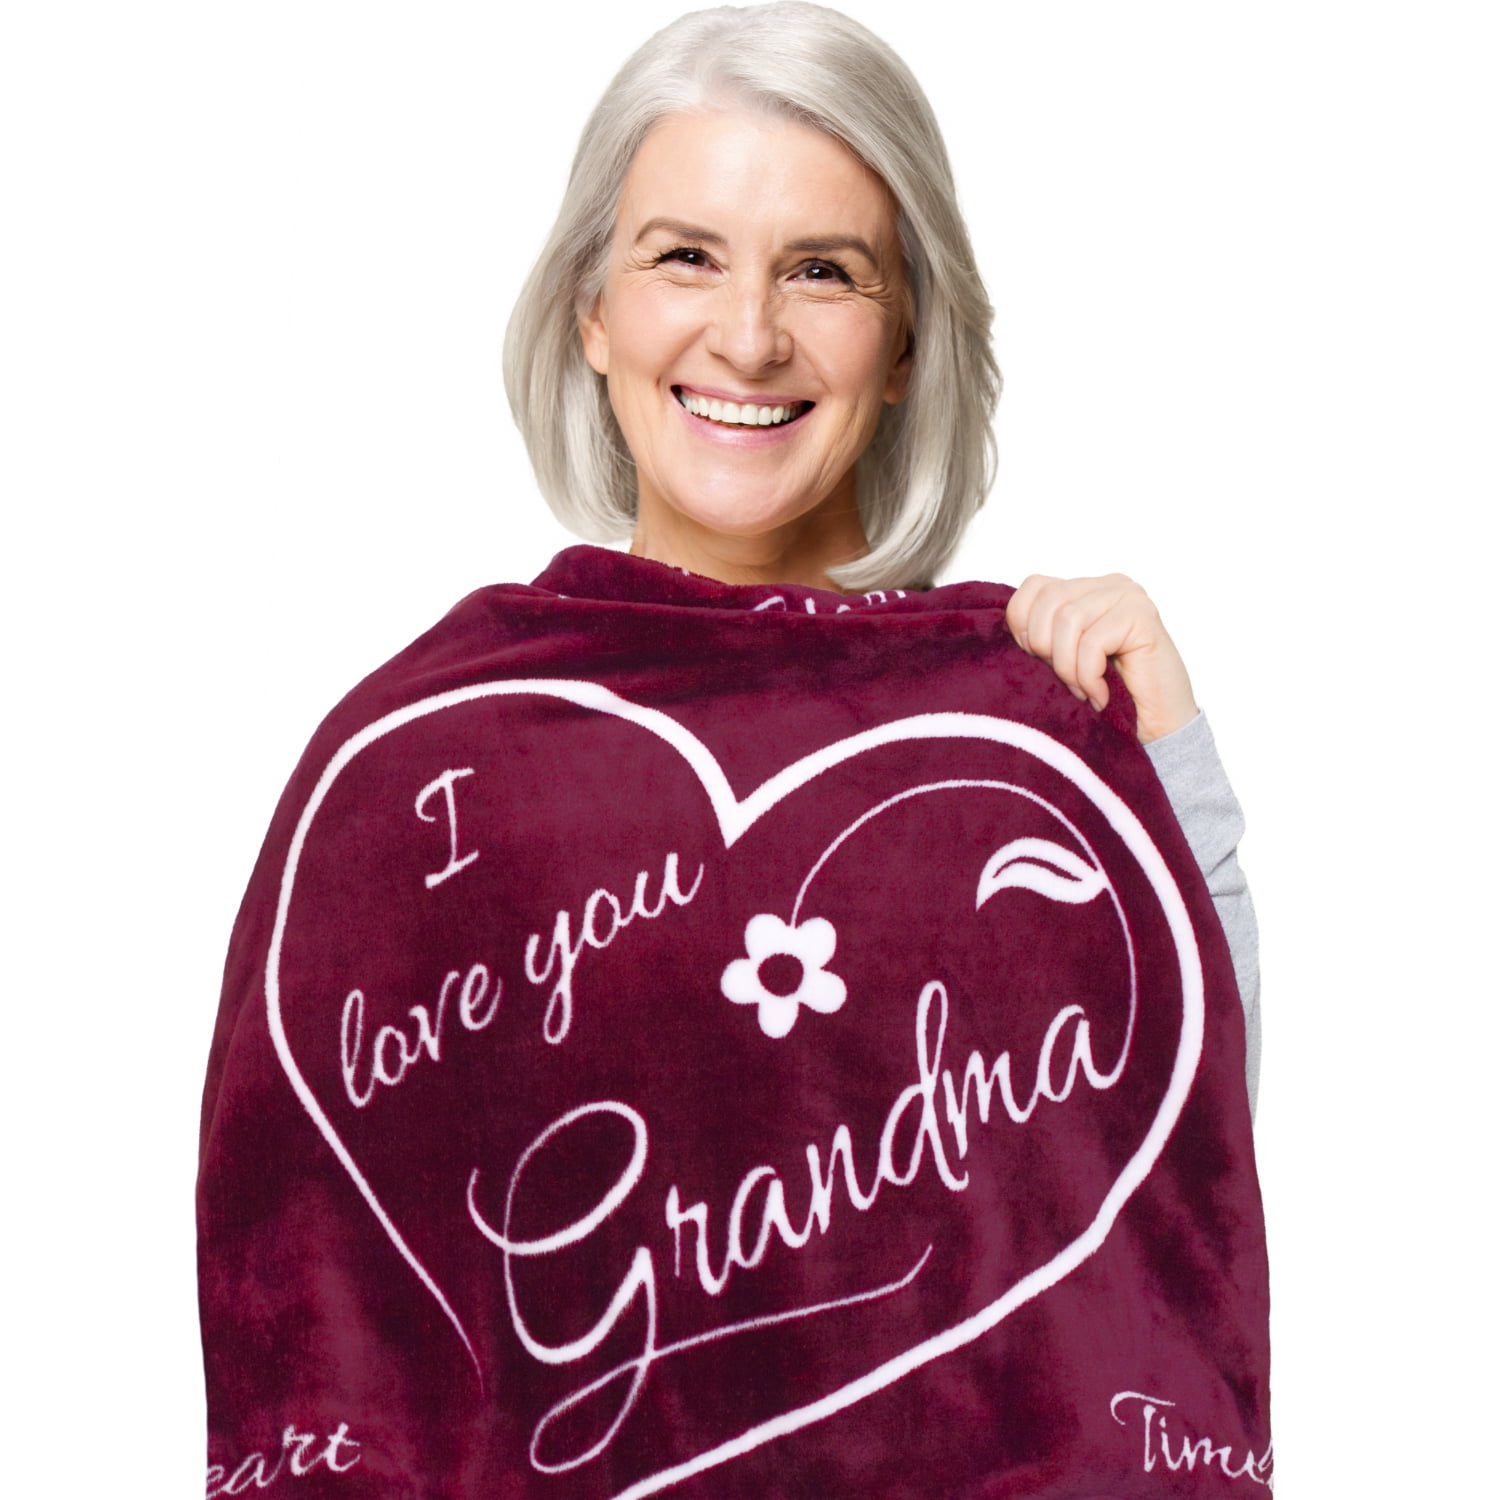 I Love You Grandma Blanket by ButterTree - Adult Christmas Gifts for Grandma  (Red Throw, 65 x 50) 